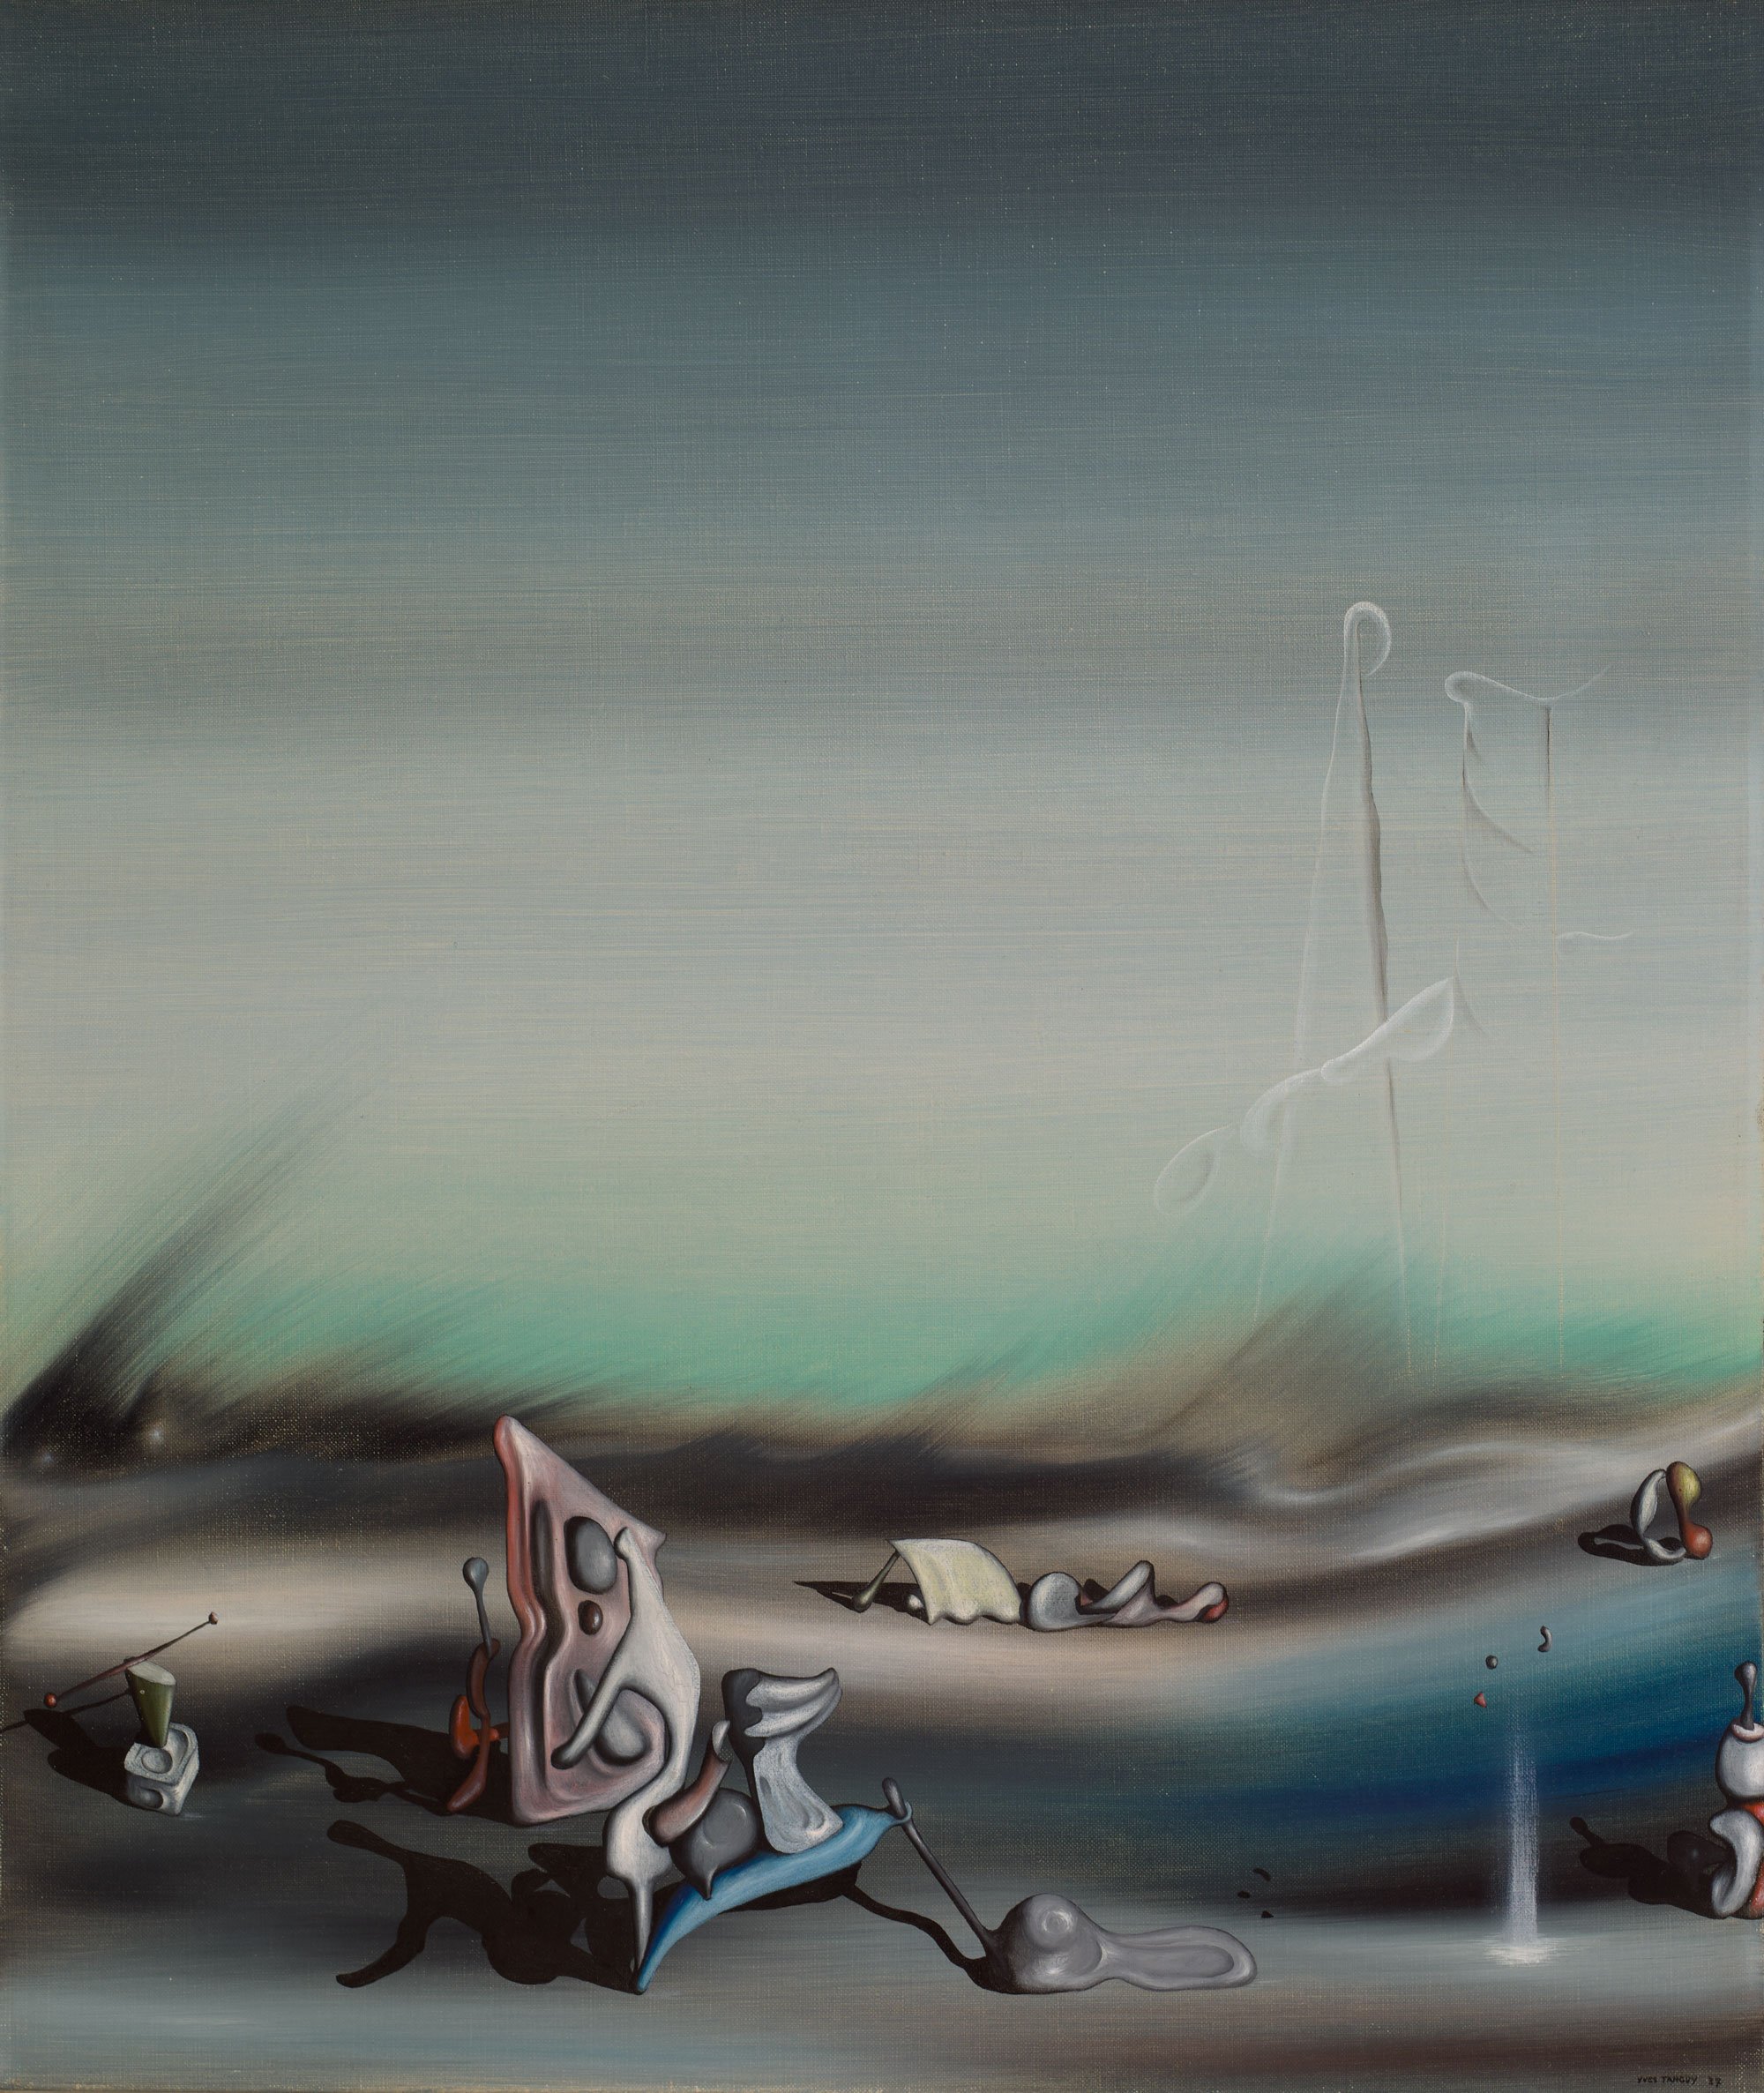  Yves Tanguy (United States, 1900-1955),  Untitled , 1937, oil on canvas, 21 ¾ x 18 3/16 inches. Isabelle and Scott Black Collection. © 2022 Estate of Yves Tanguy / Artists Rights Society (ARS), New York 